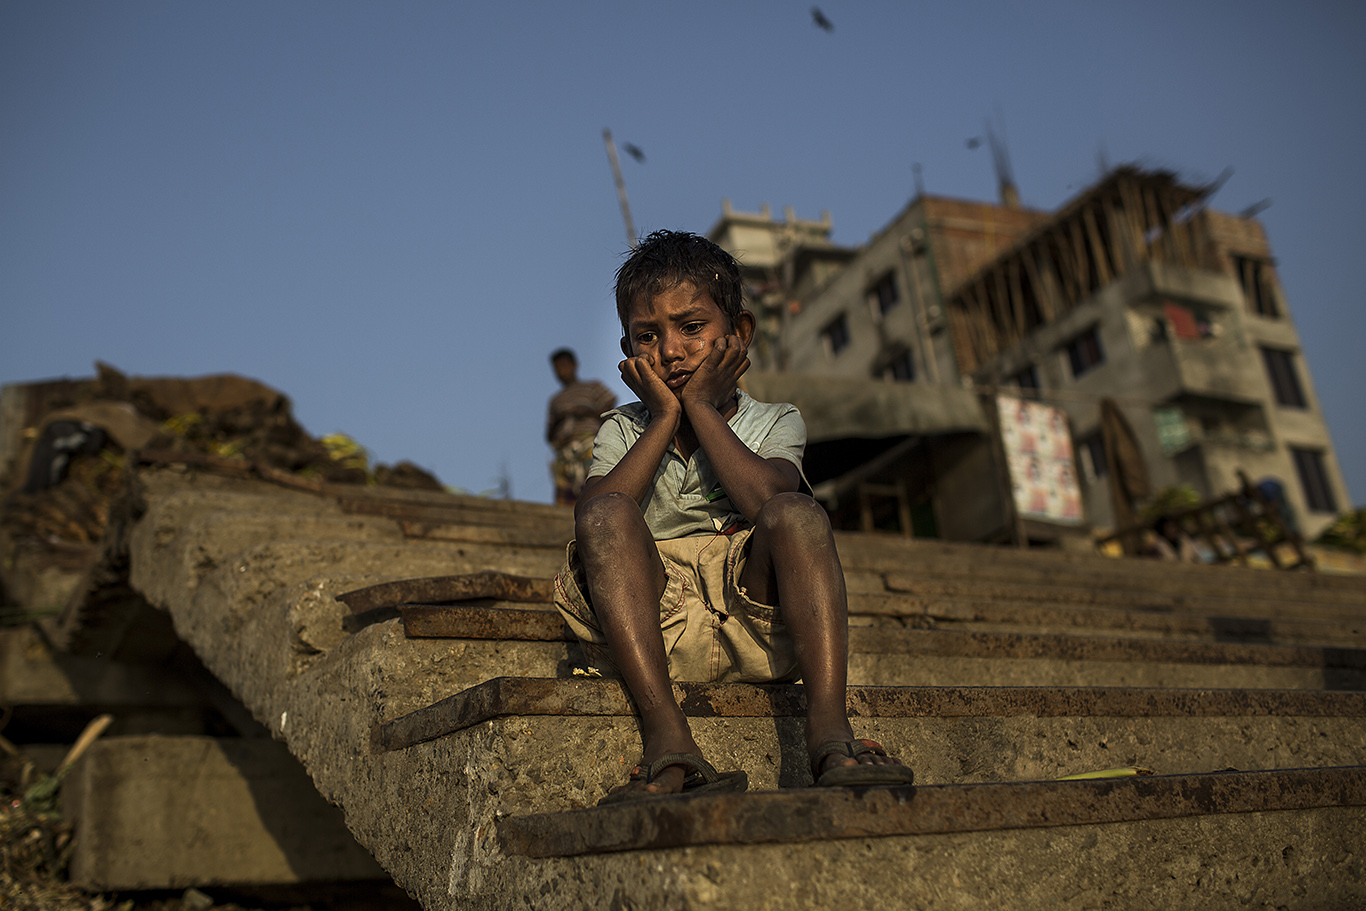 A thoughtful kid is seen on the banks of the Buriganga River -not pictured- in Dhaka, Bangladesh. He and his family work in the river recycling materials. The state of surface and ground water pollution in Bangladesh is alarming. Especially the Buriganga is largely polluted by Dhaka city. Dhaka has been named, according to several reports, the worst city in the world to live in.